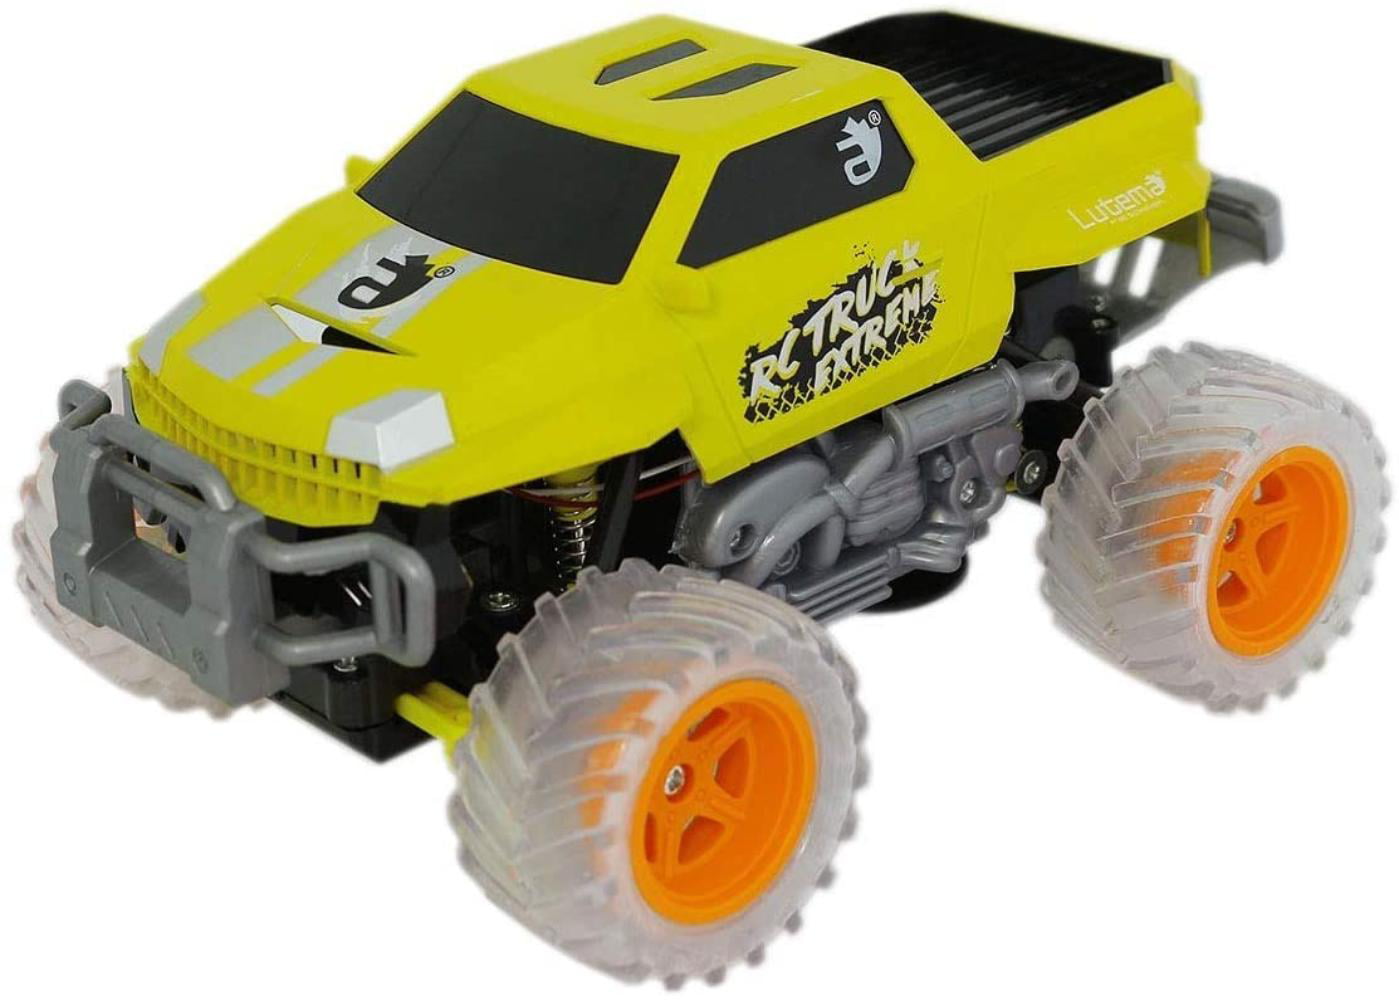 Yellow Lutema Extreme Pickup 4CH Remote Control Truck